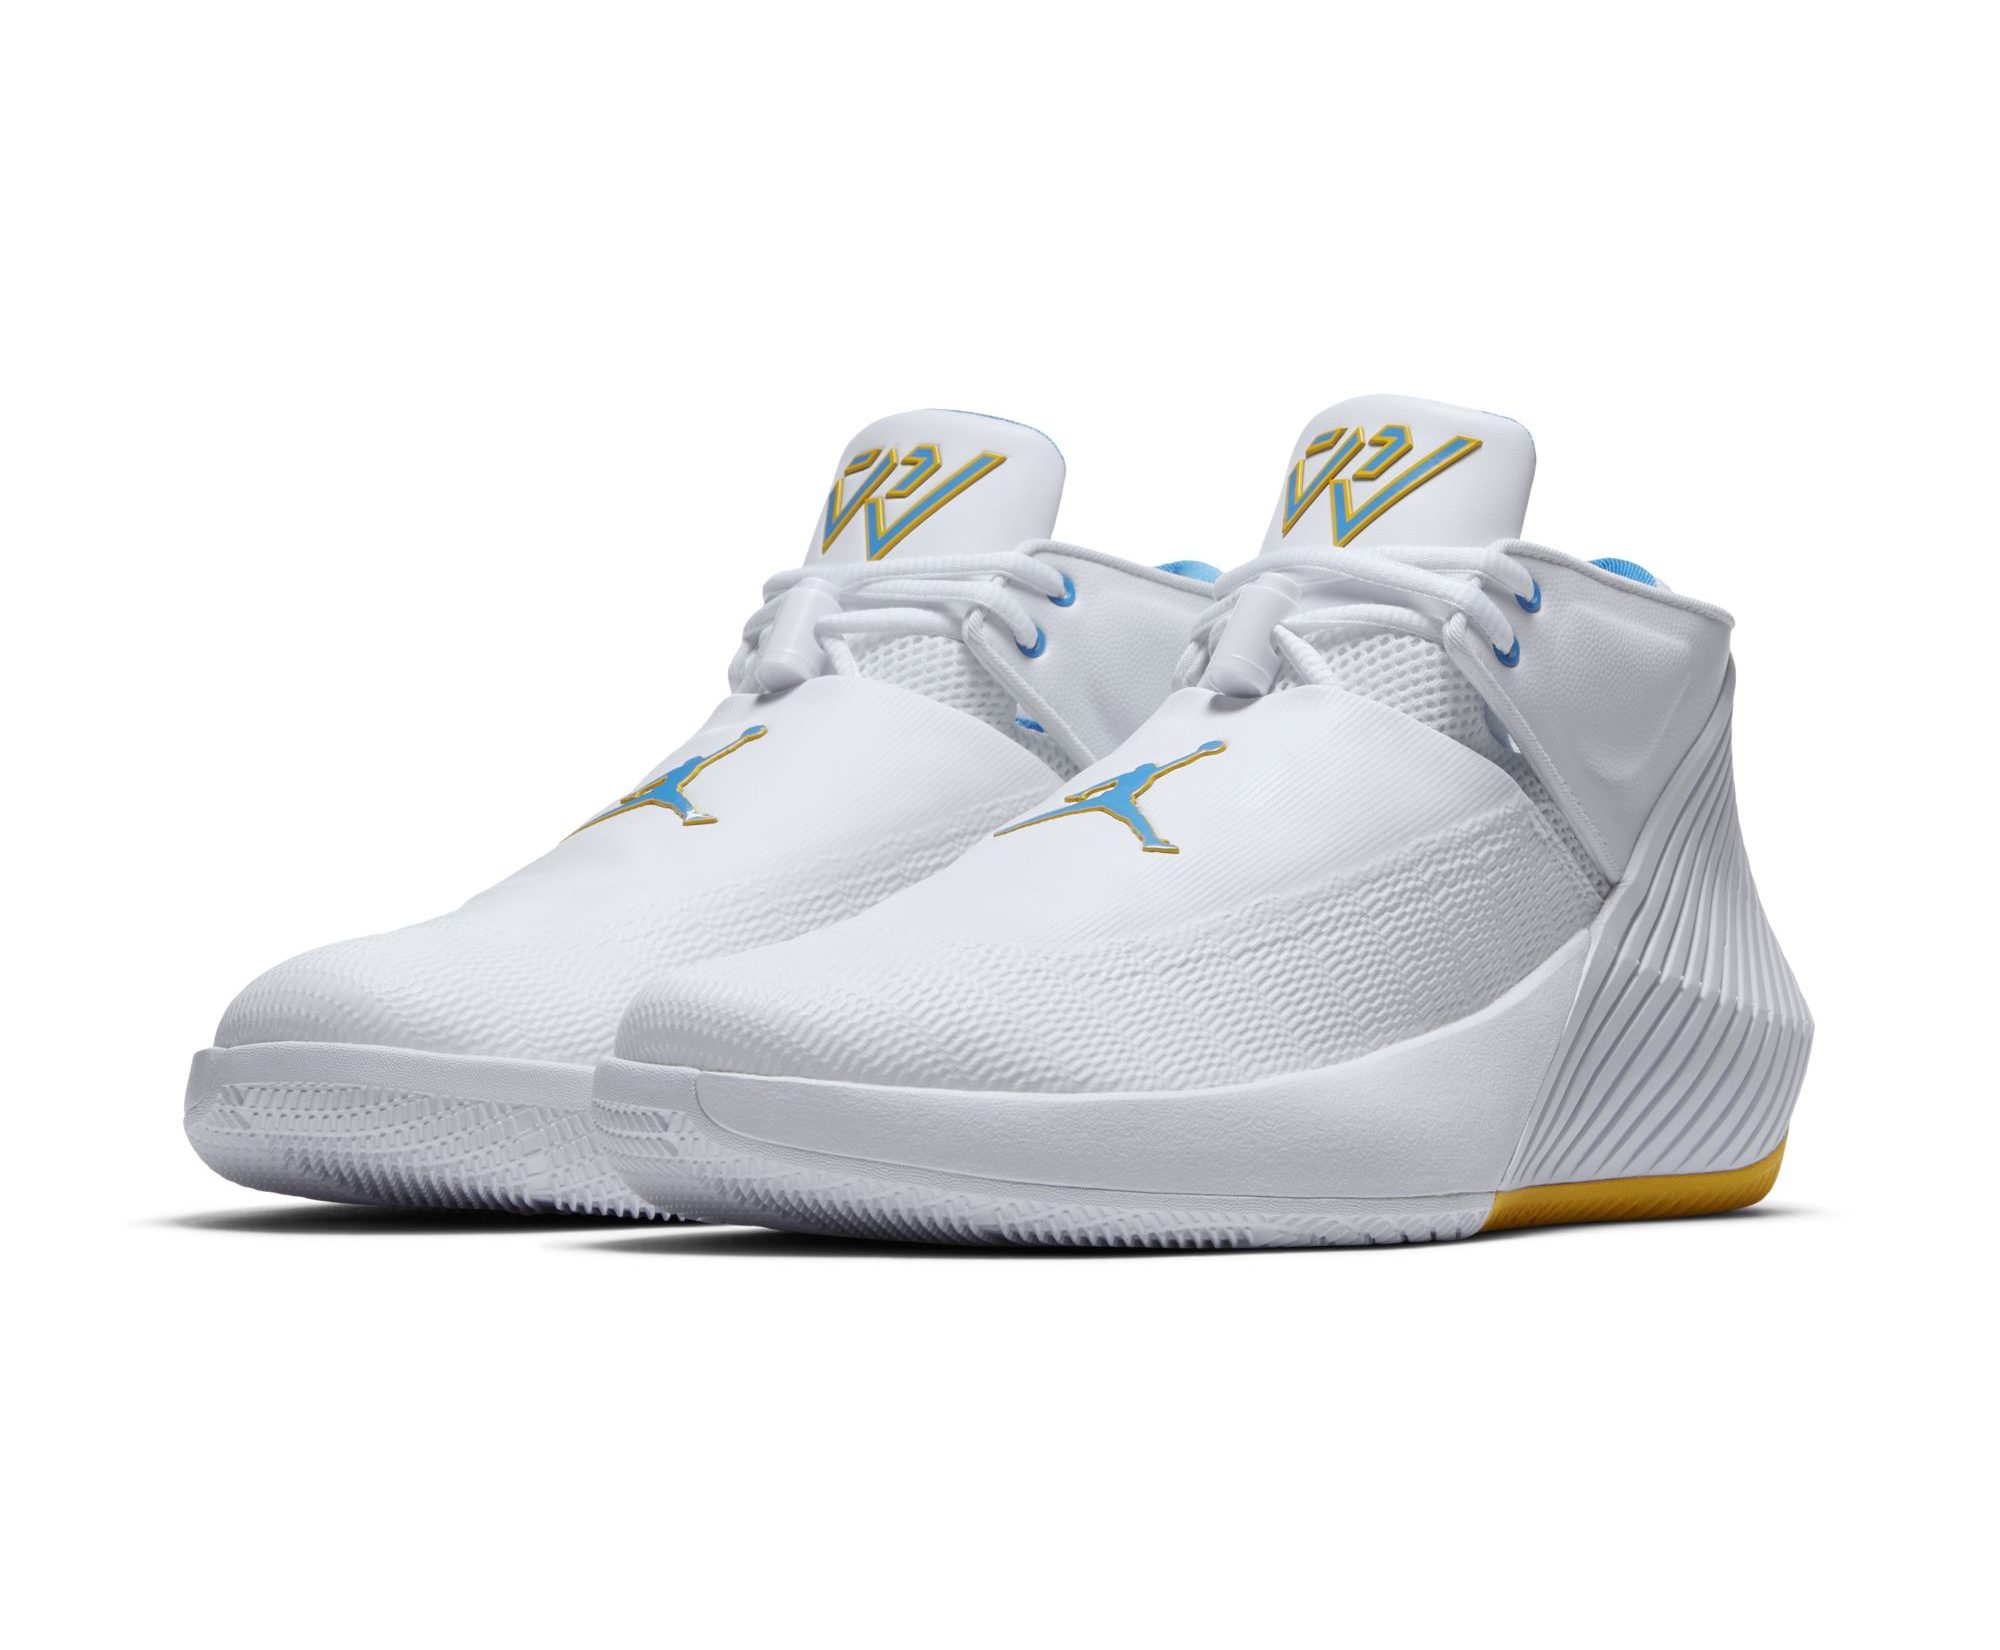 The Jordan Why Not Zer0.1 Low Surfaces 